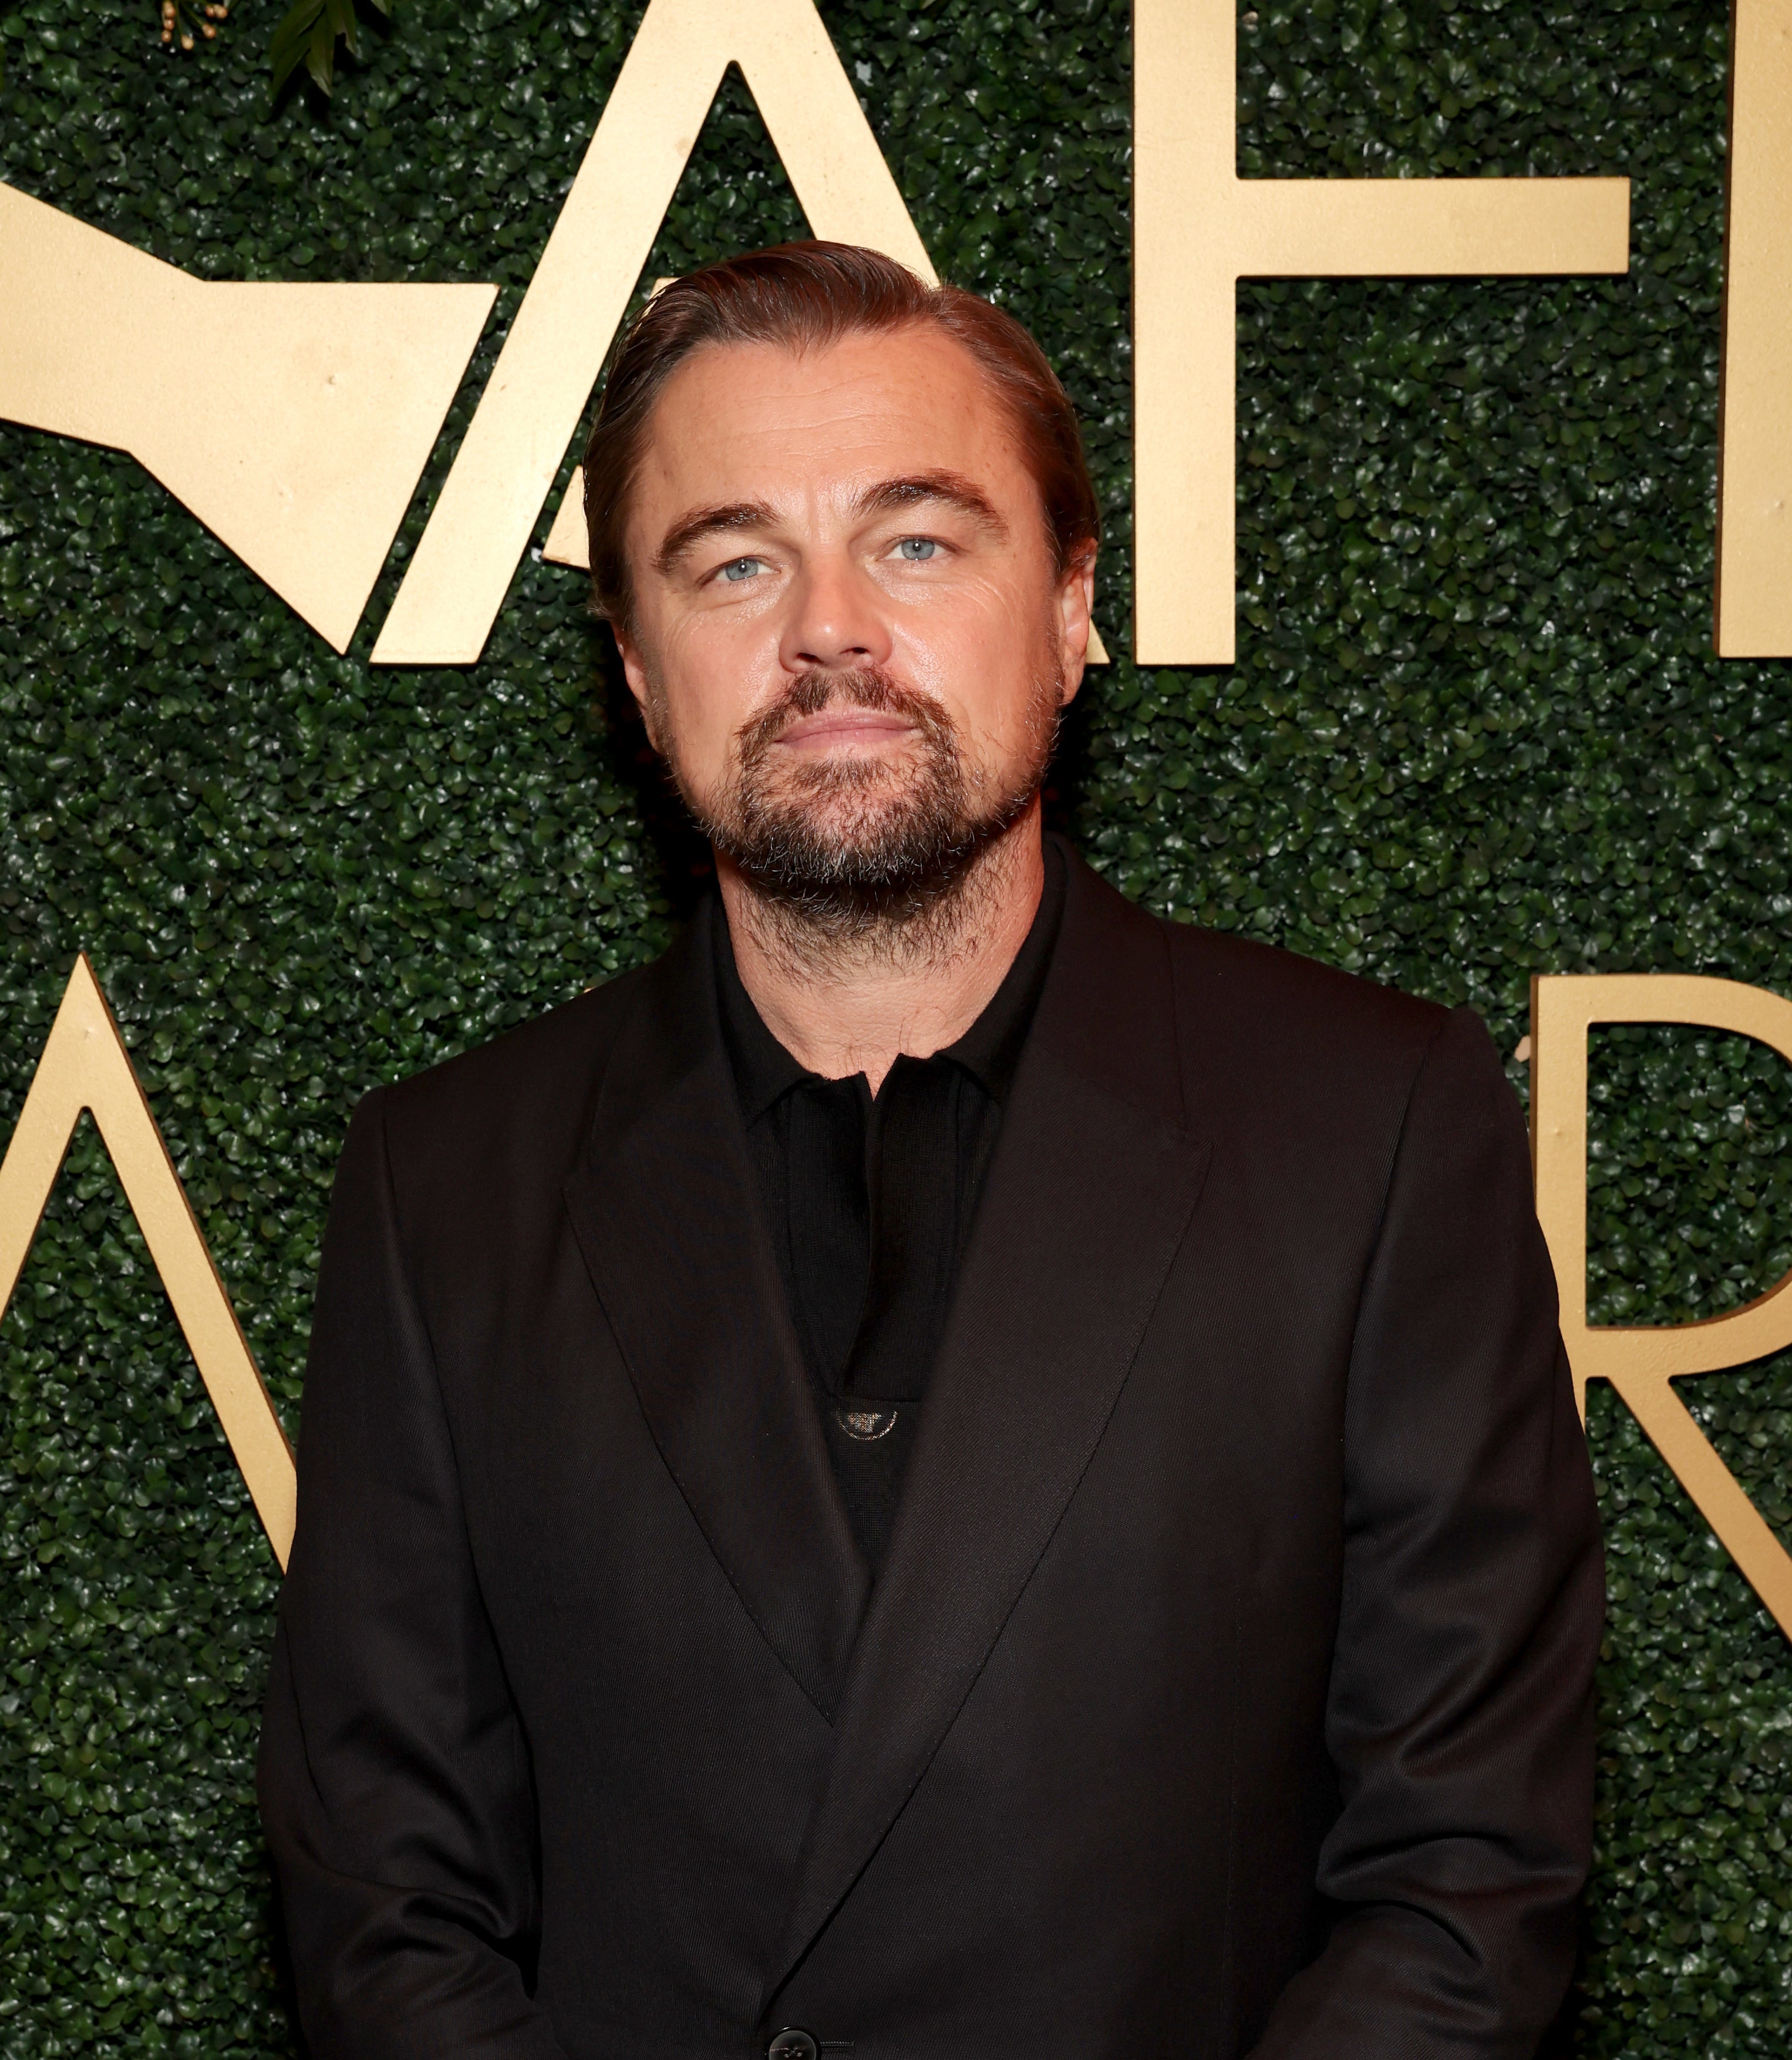 Leonardo DiCaprio in a black suit at the AFI Awards against a floral backdrop